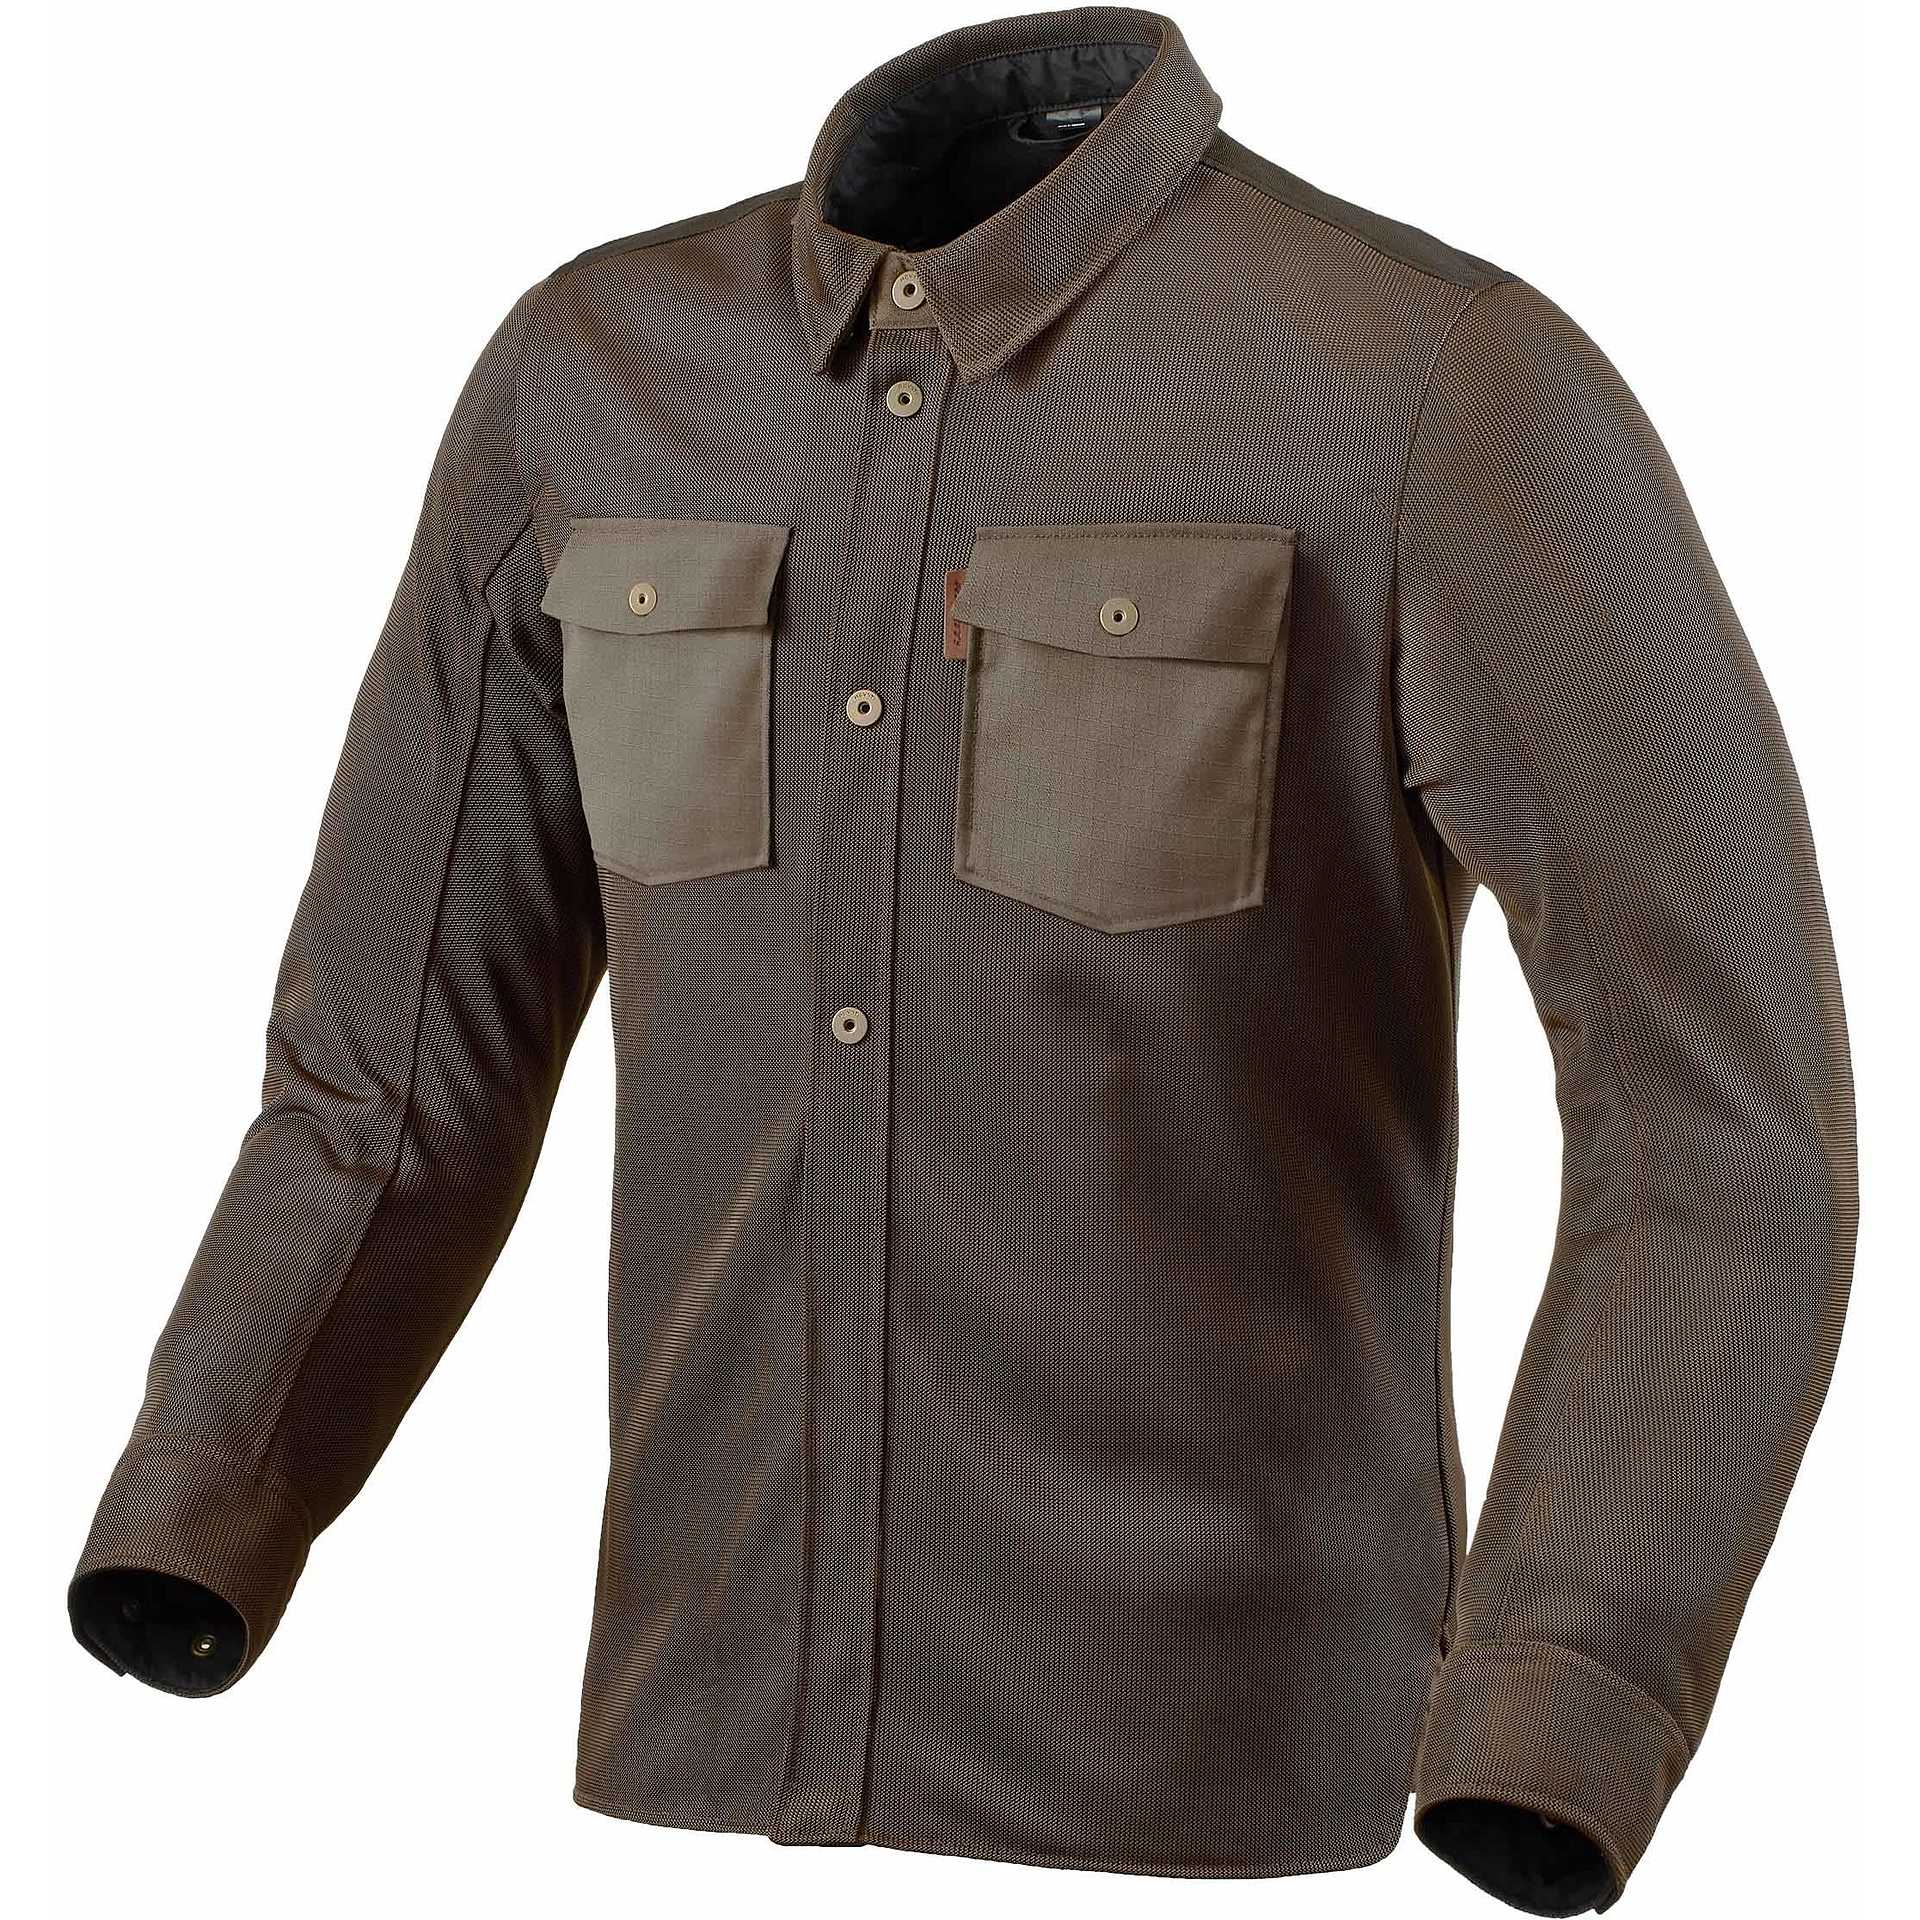 Image of REV'IT! Overshirt Tracer Air 2 Jacket Brown Size XL ID 8700001317122